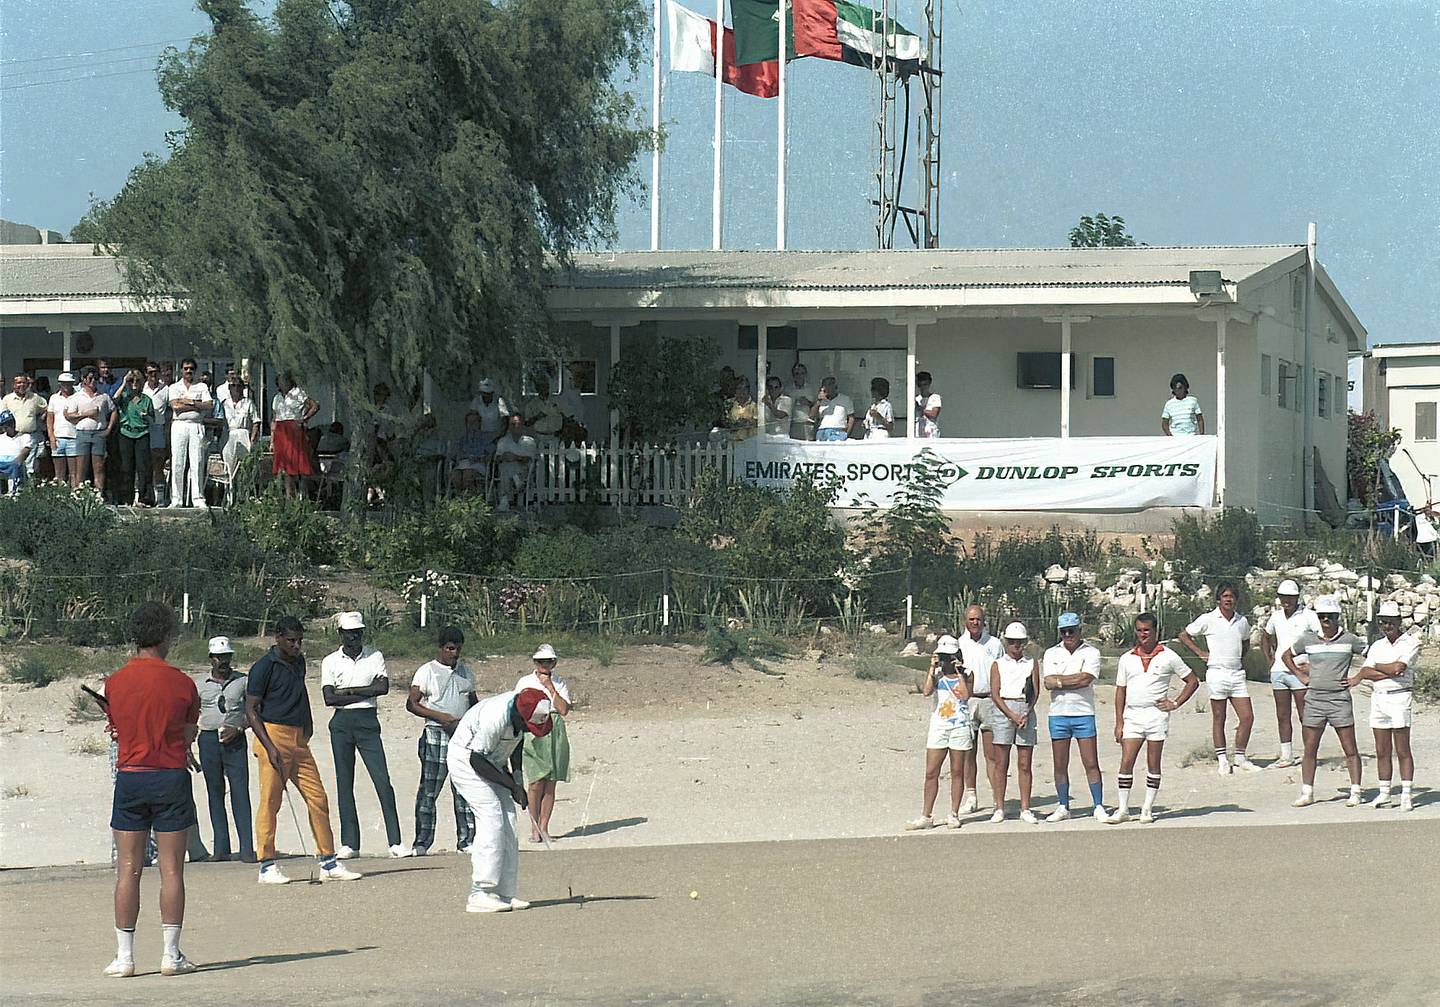 Before the opening of the Emirate's Golf Club in 1988, the Dubai Country Club was Dubai's leading golfing destination. Photo: Dubai As It Used To Be